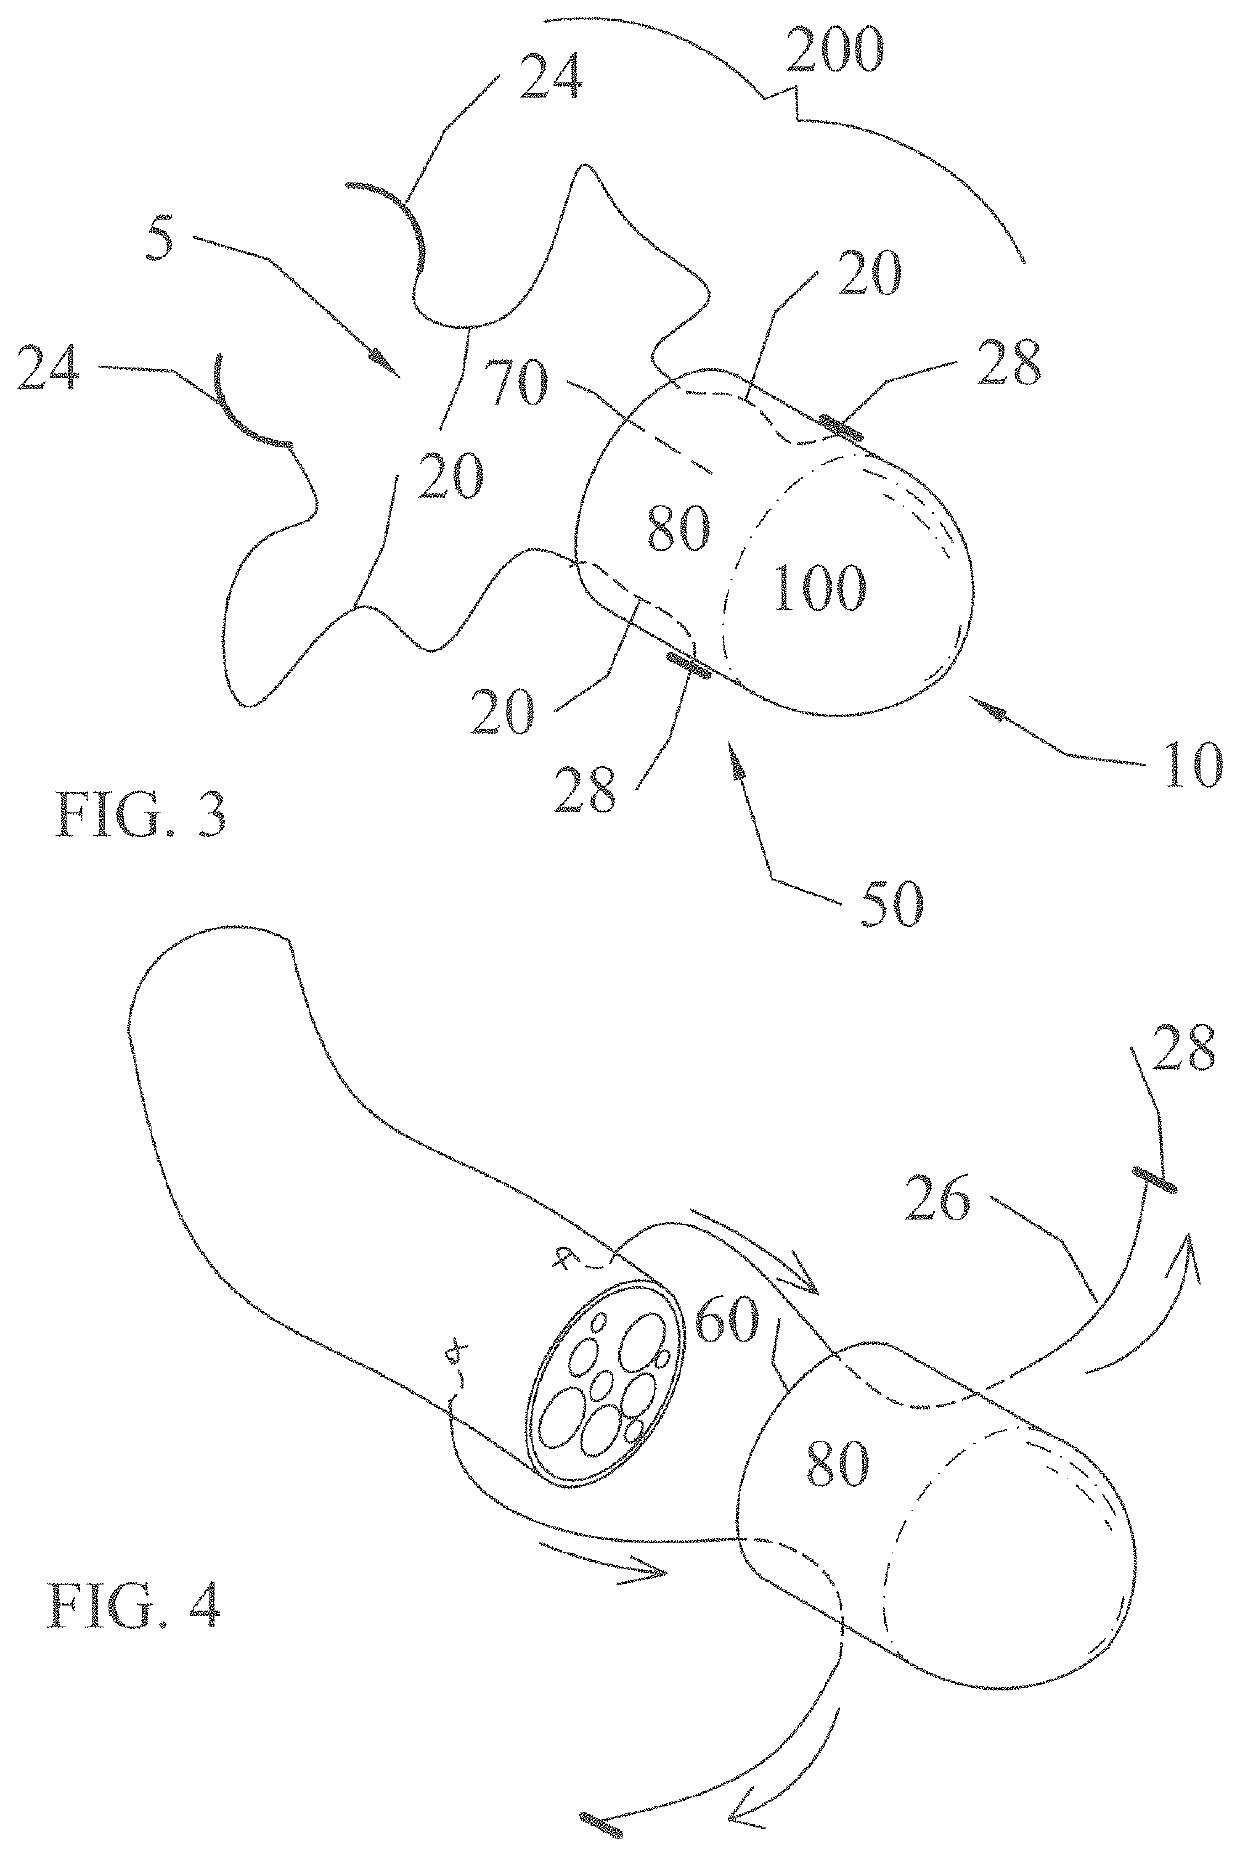 Implant devices with a pre-set pulley system